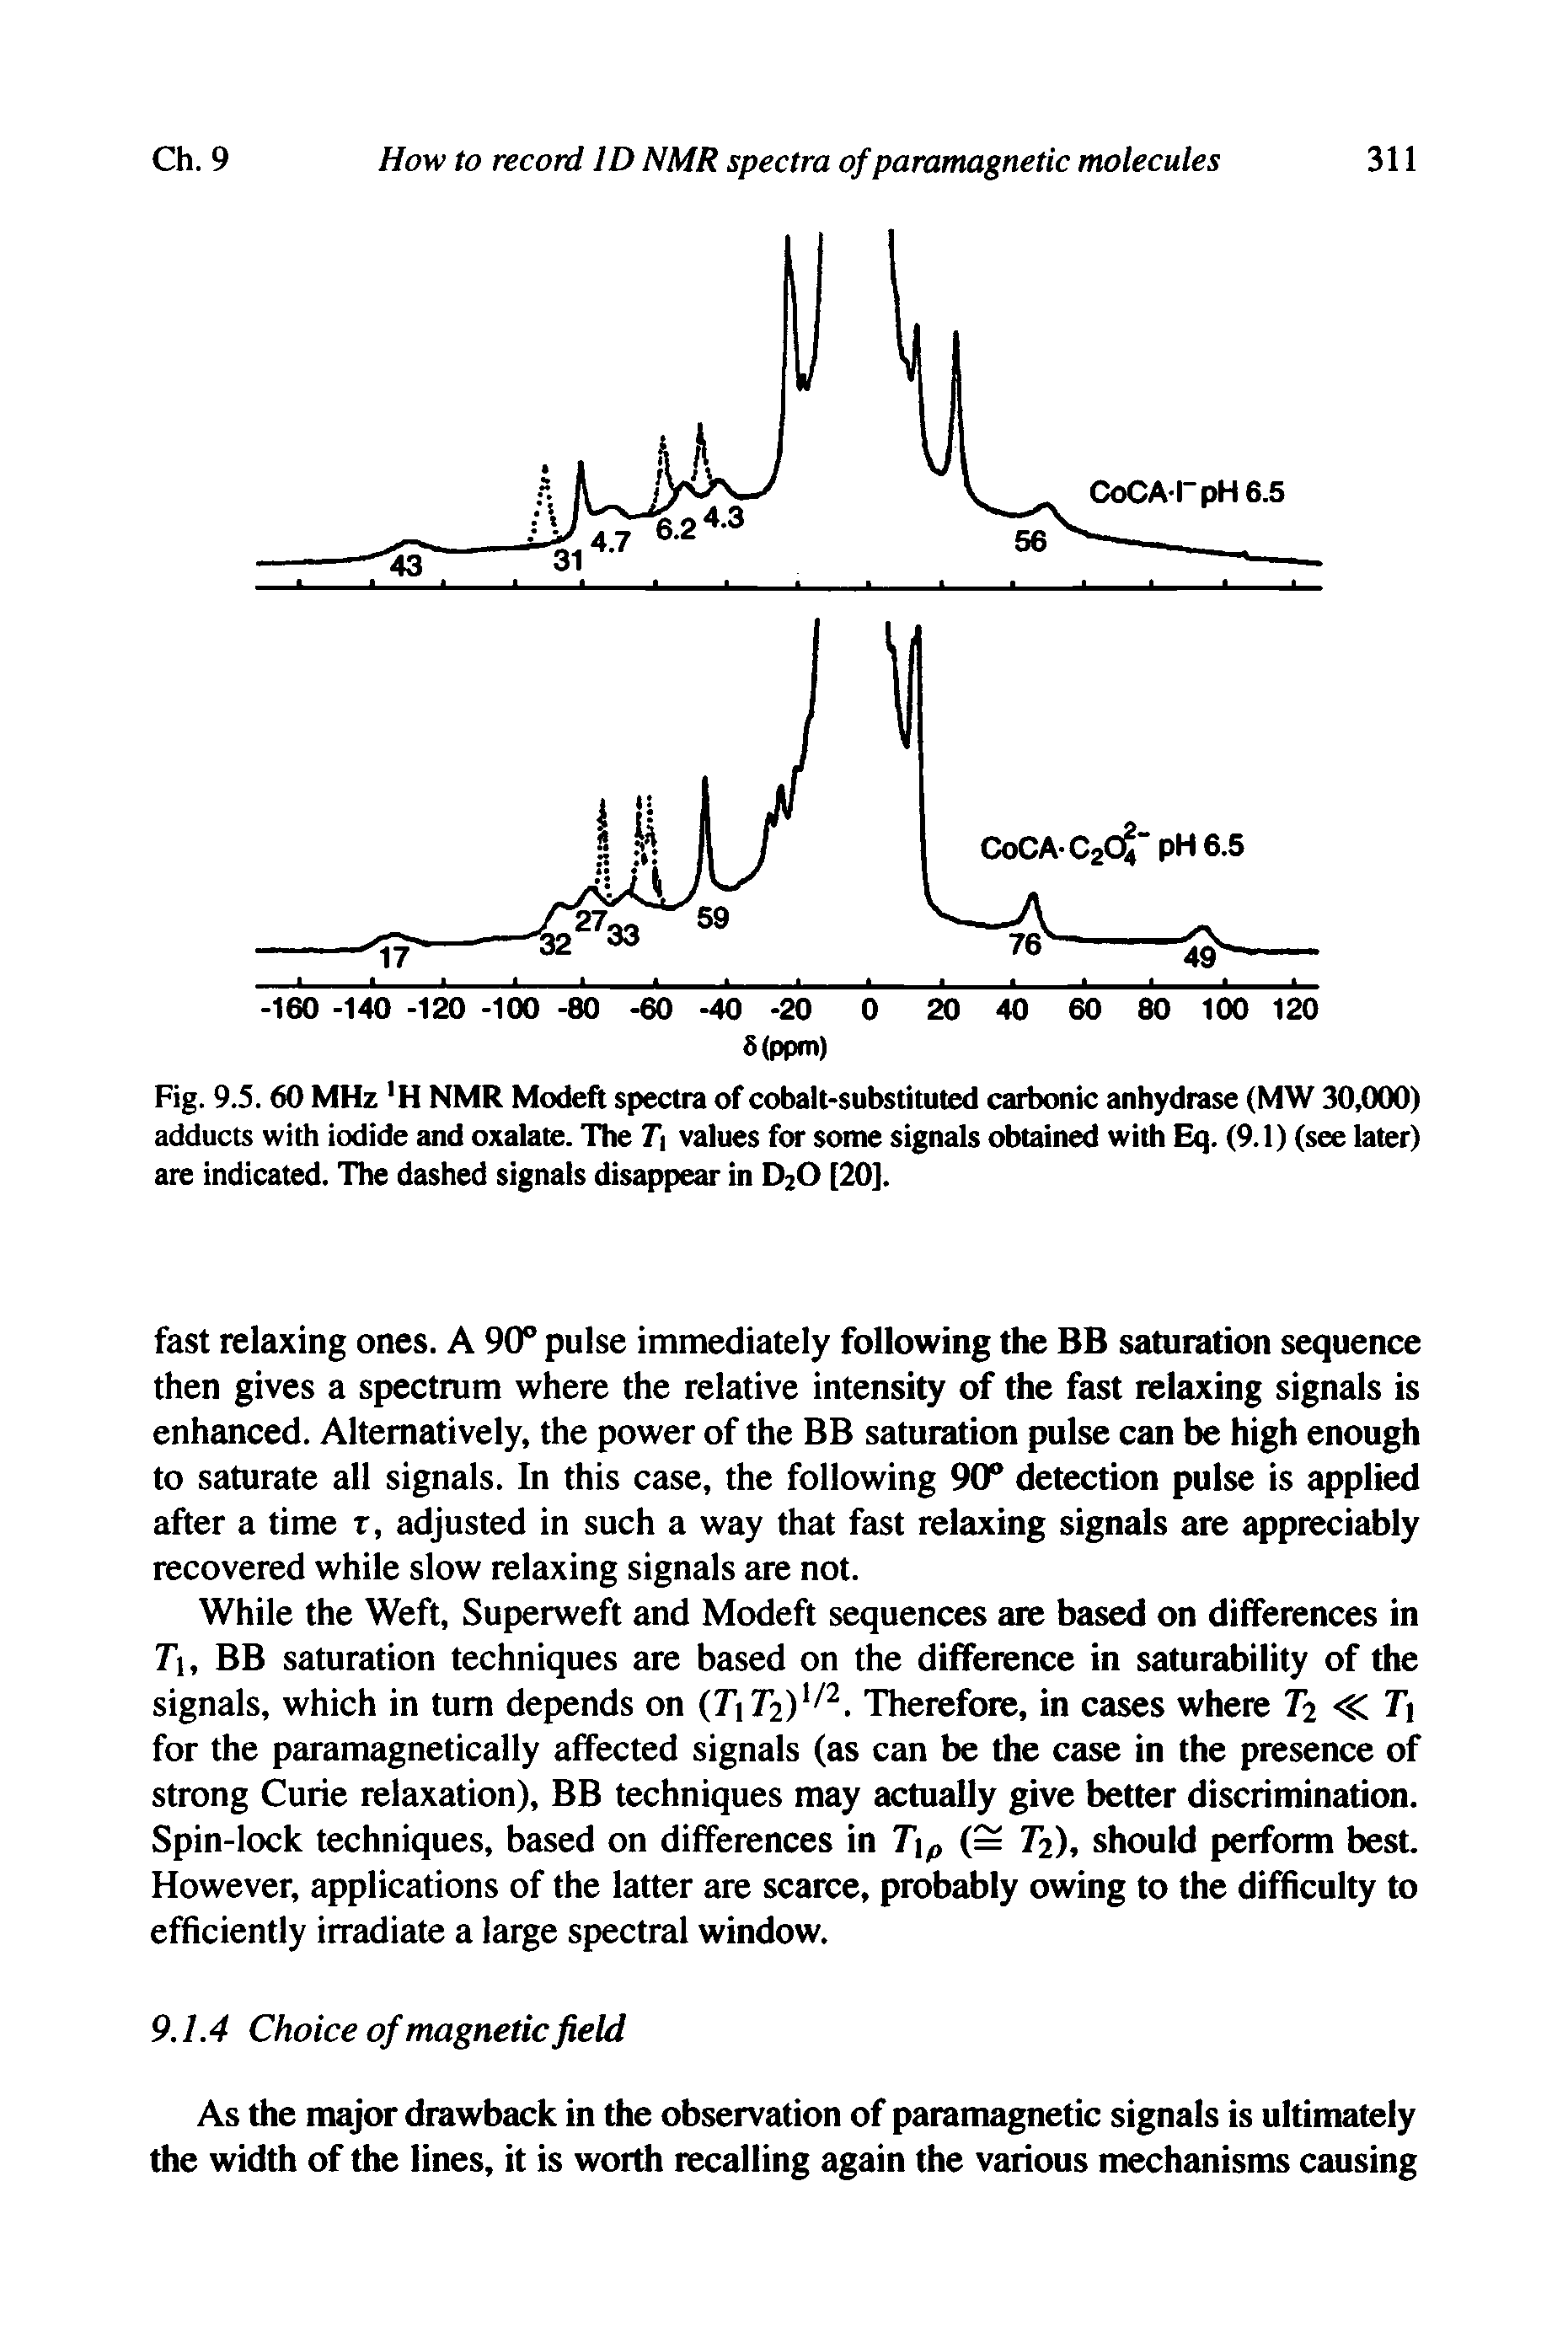 Fig. 9.5.60 MHz H NMR Modeft spectra of cobalt-substituted carbonic anhydrase (MW 30,000) adducts with iodide and oxalate. The 7) values for some signals obtained with Eq. (9.1) (see later) are indicated. The dashed signals disappear in D20 [20].